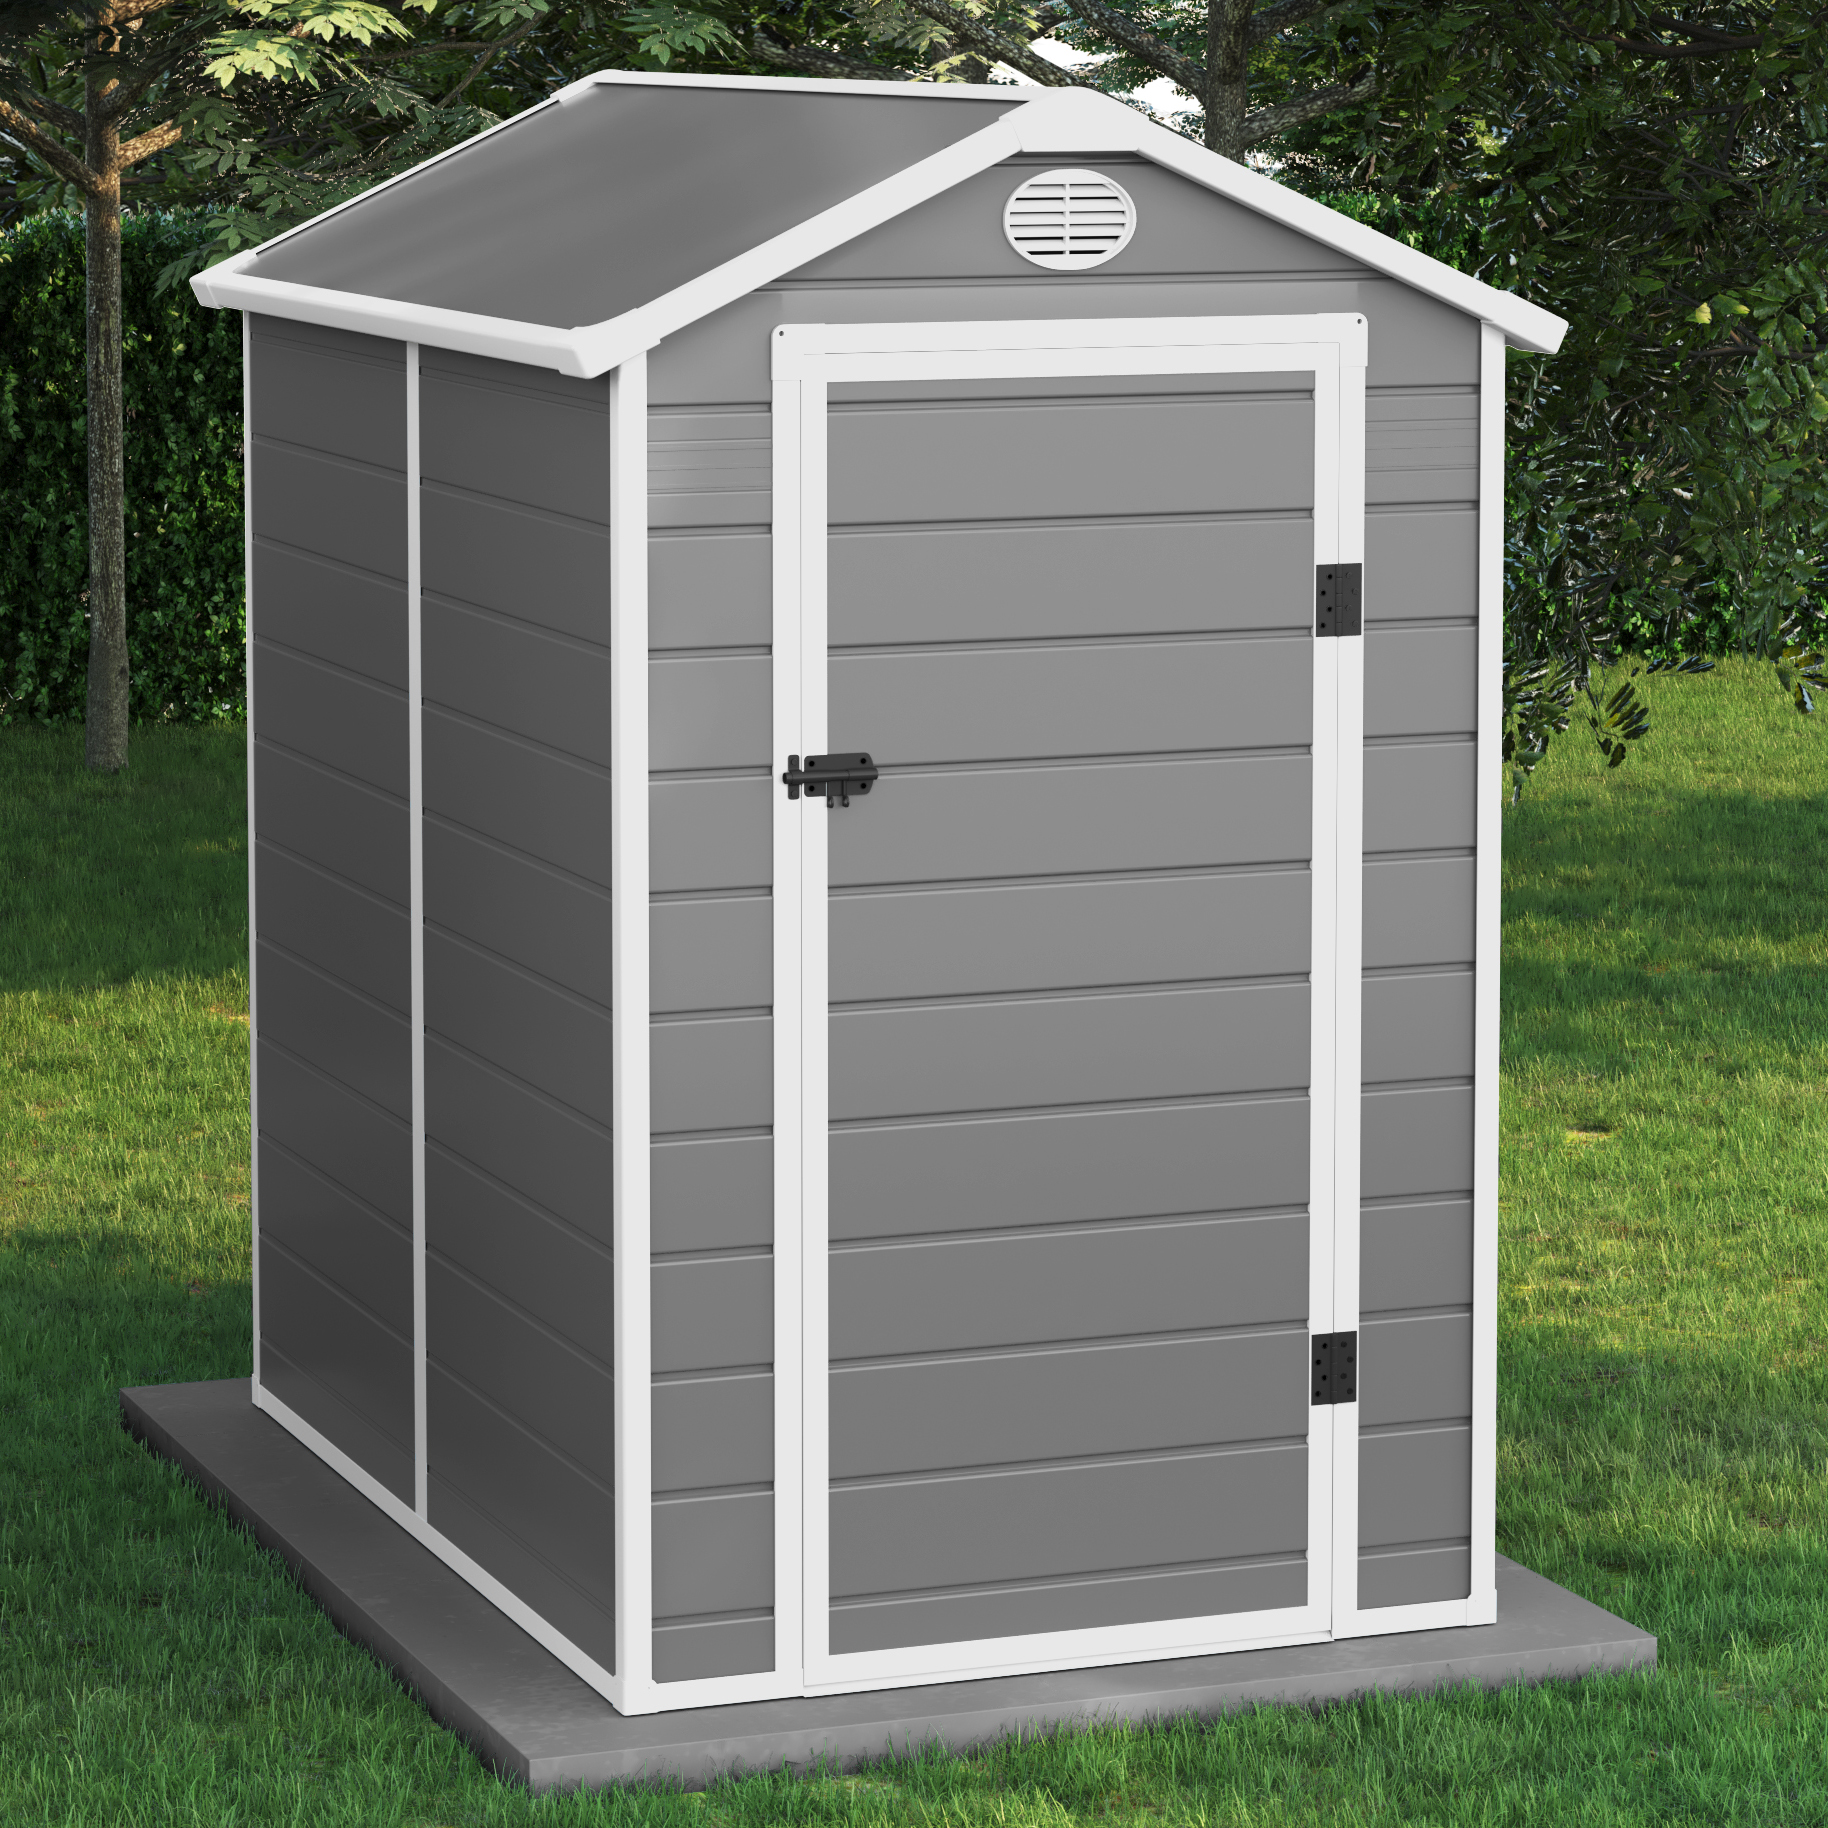 Billyoh Kingston Apex Plastic Shed Light Grey With Floor 6x9 Grey